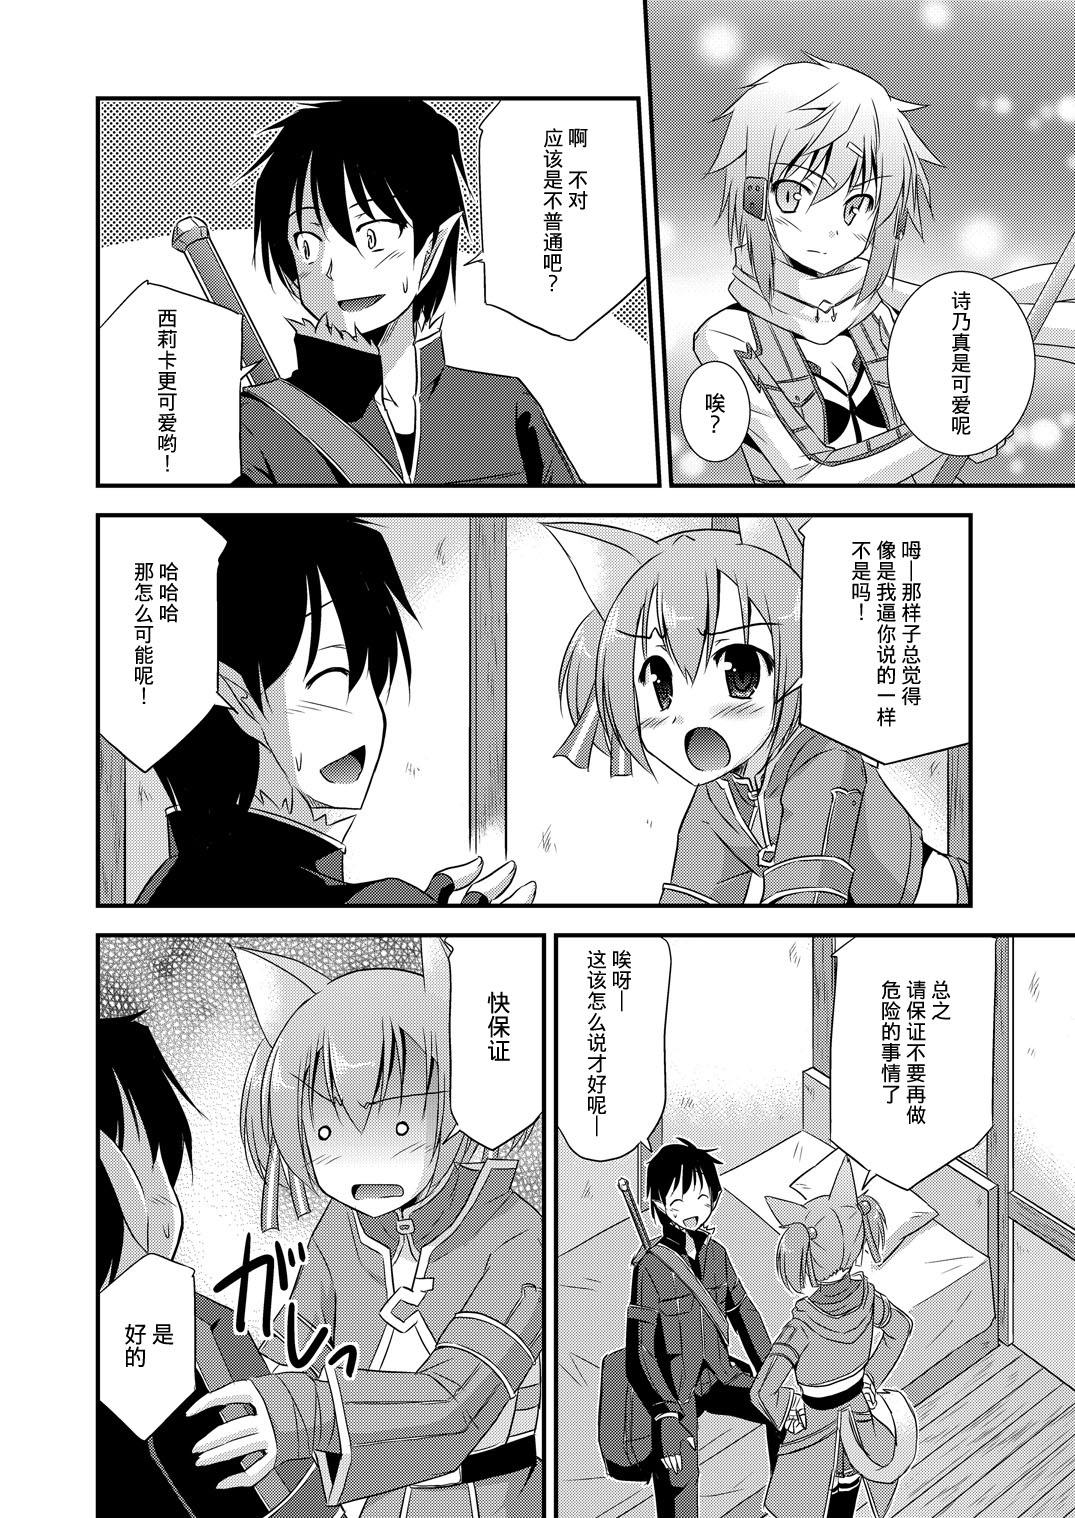 Step Fantasy Silica Route Offline Phantom Parade After - Sword art online Transexual - Page 5